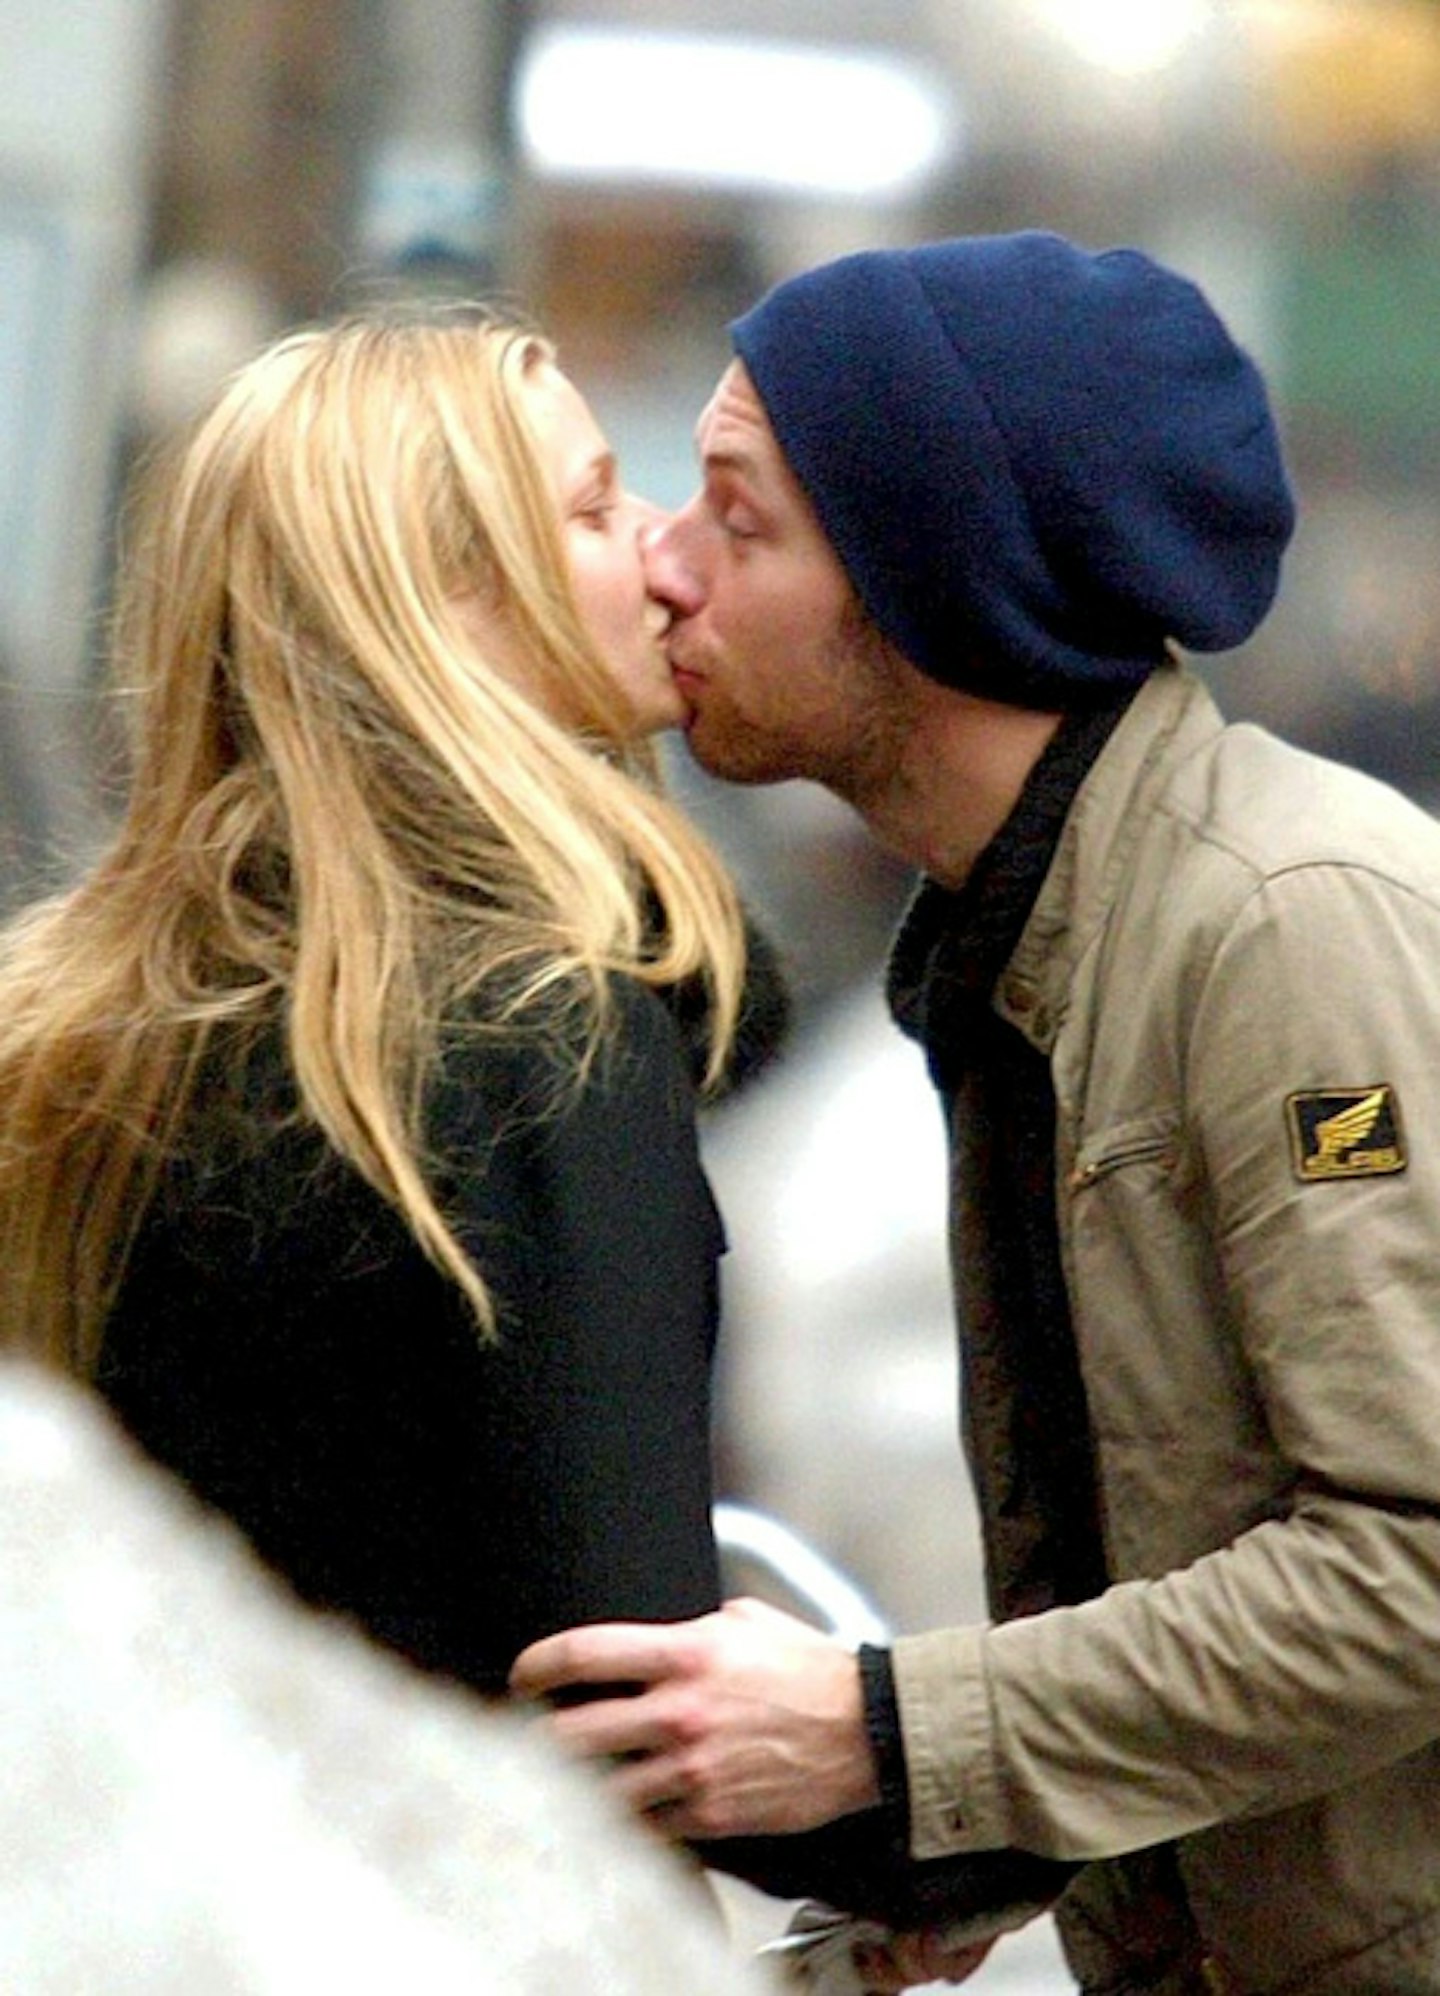 Chris Martin and Gwyneth Paltrow were married for 10 years